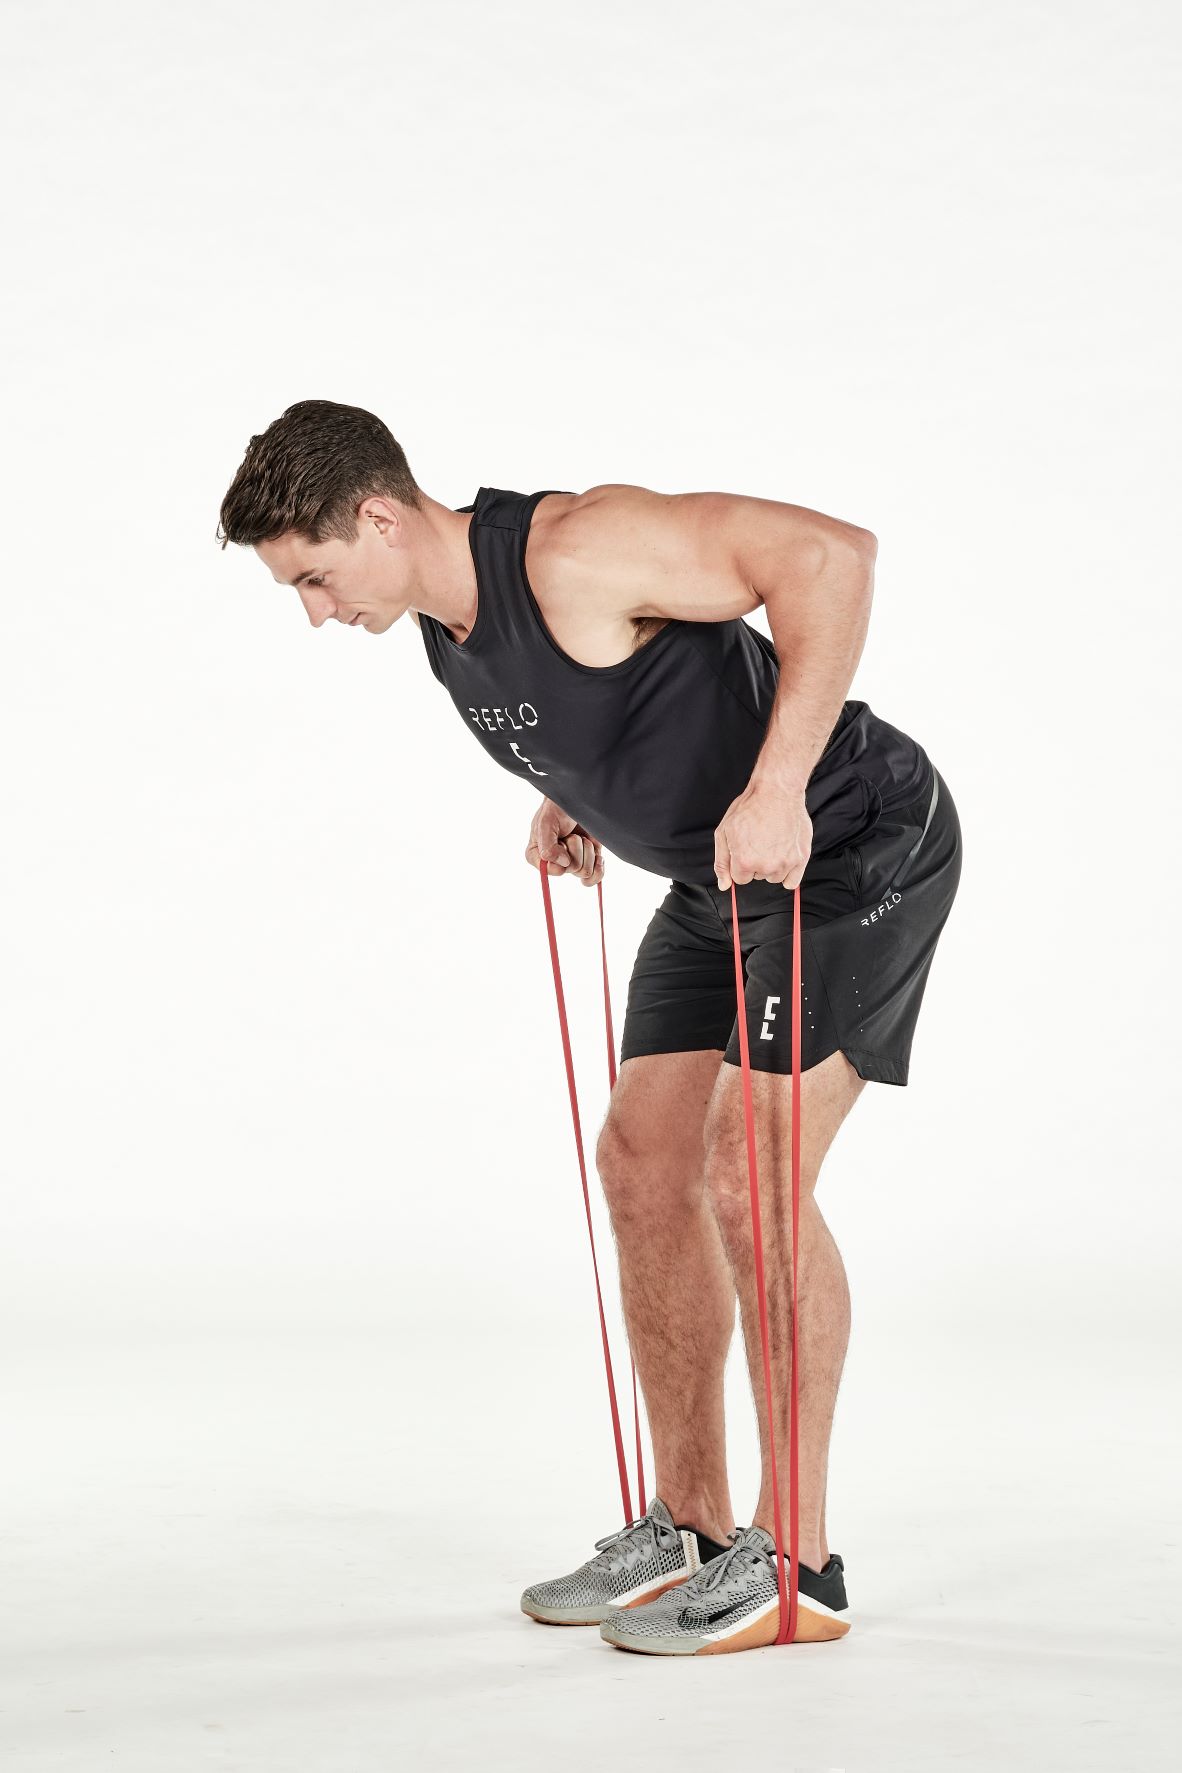 man demonstrating step two of resistance band bent over row; he is bent over at the hips, knees slightly bent, pulling up on a band that is wrapped around his feet; he wears a black fitness vest, black shorts and trainers